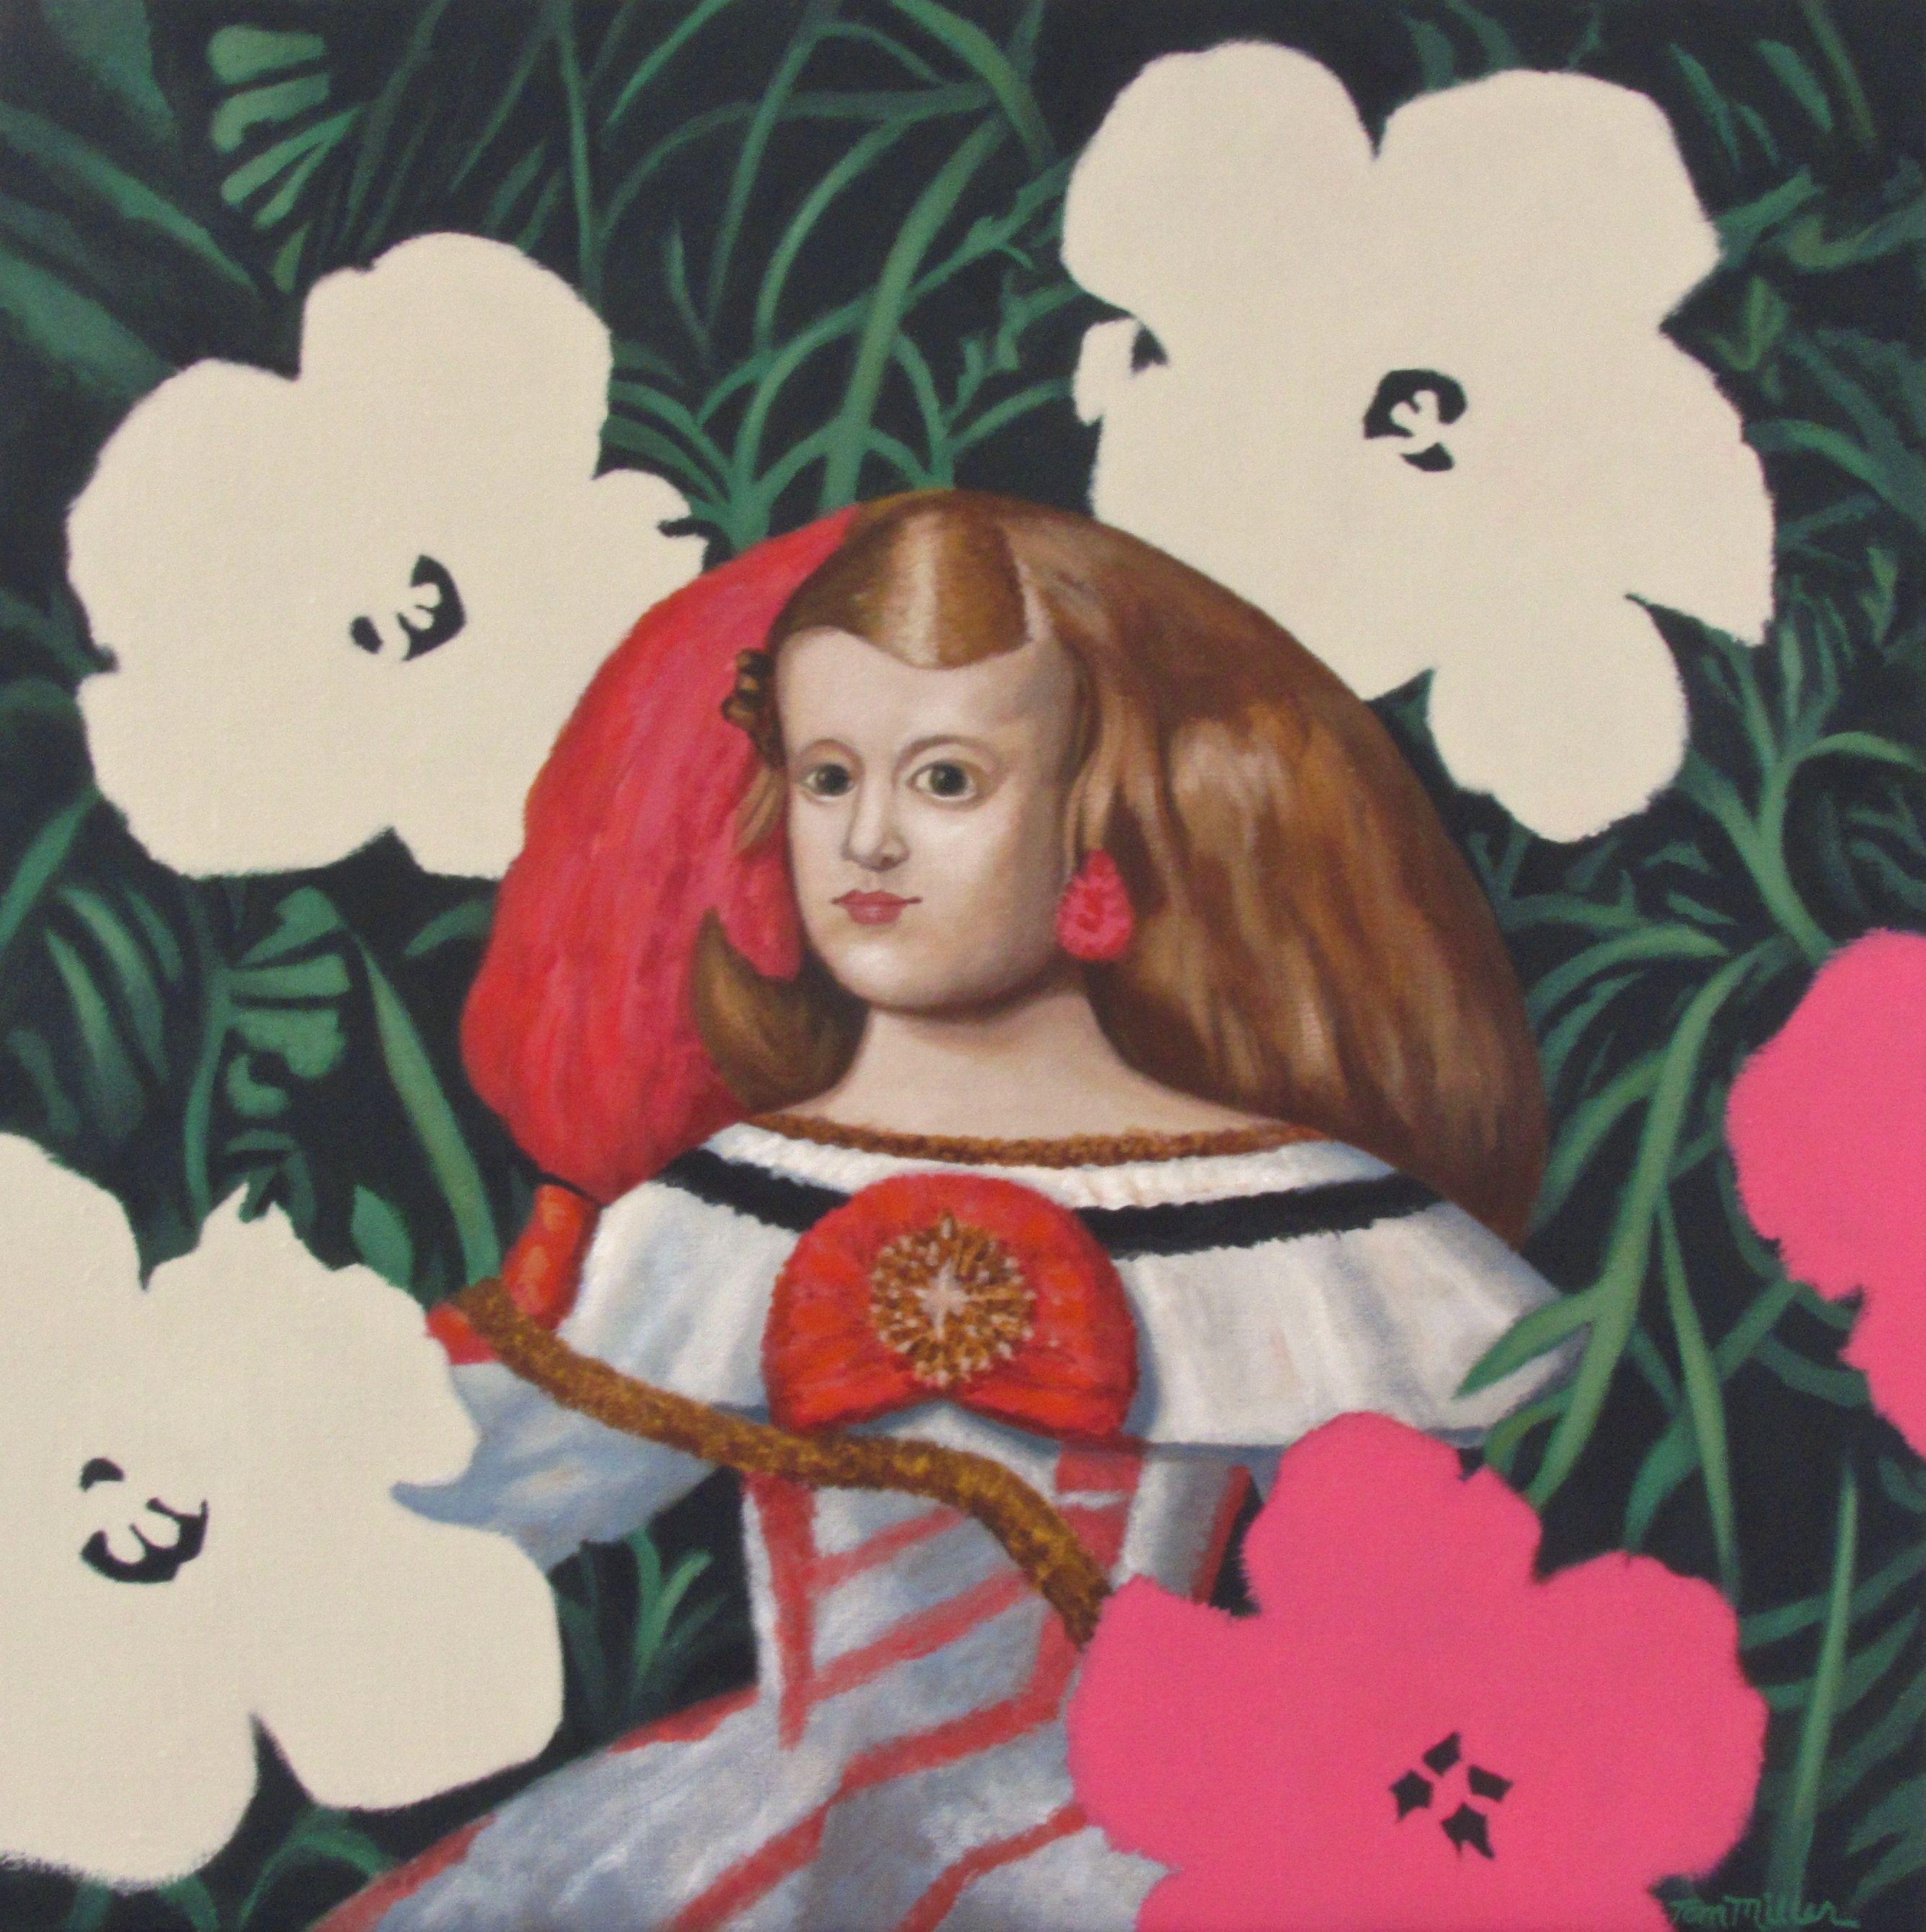 THE LITTLE PRINCESS is taken from a Baroque painting by Velazquez. She has been transported to a garden of flowers by Pop-Artist Andy Warhol.  A child in a flower garden. A world of innocent delight and  imagination.  To begin such a painting I ask